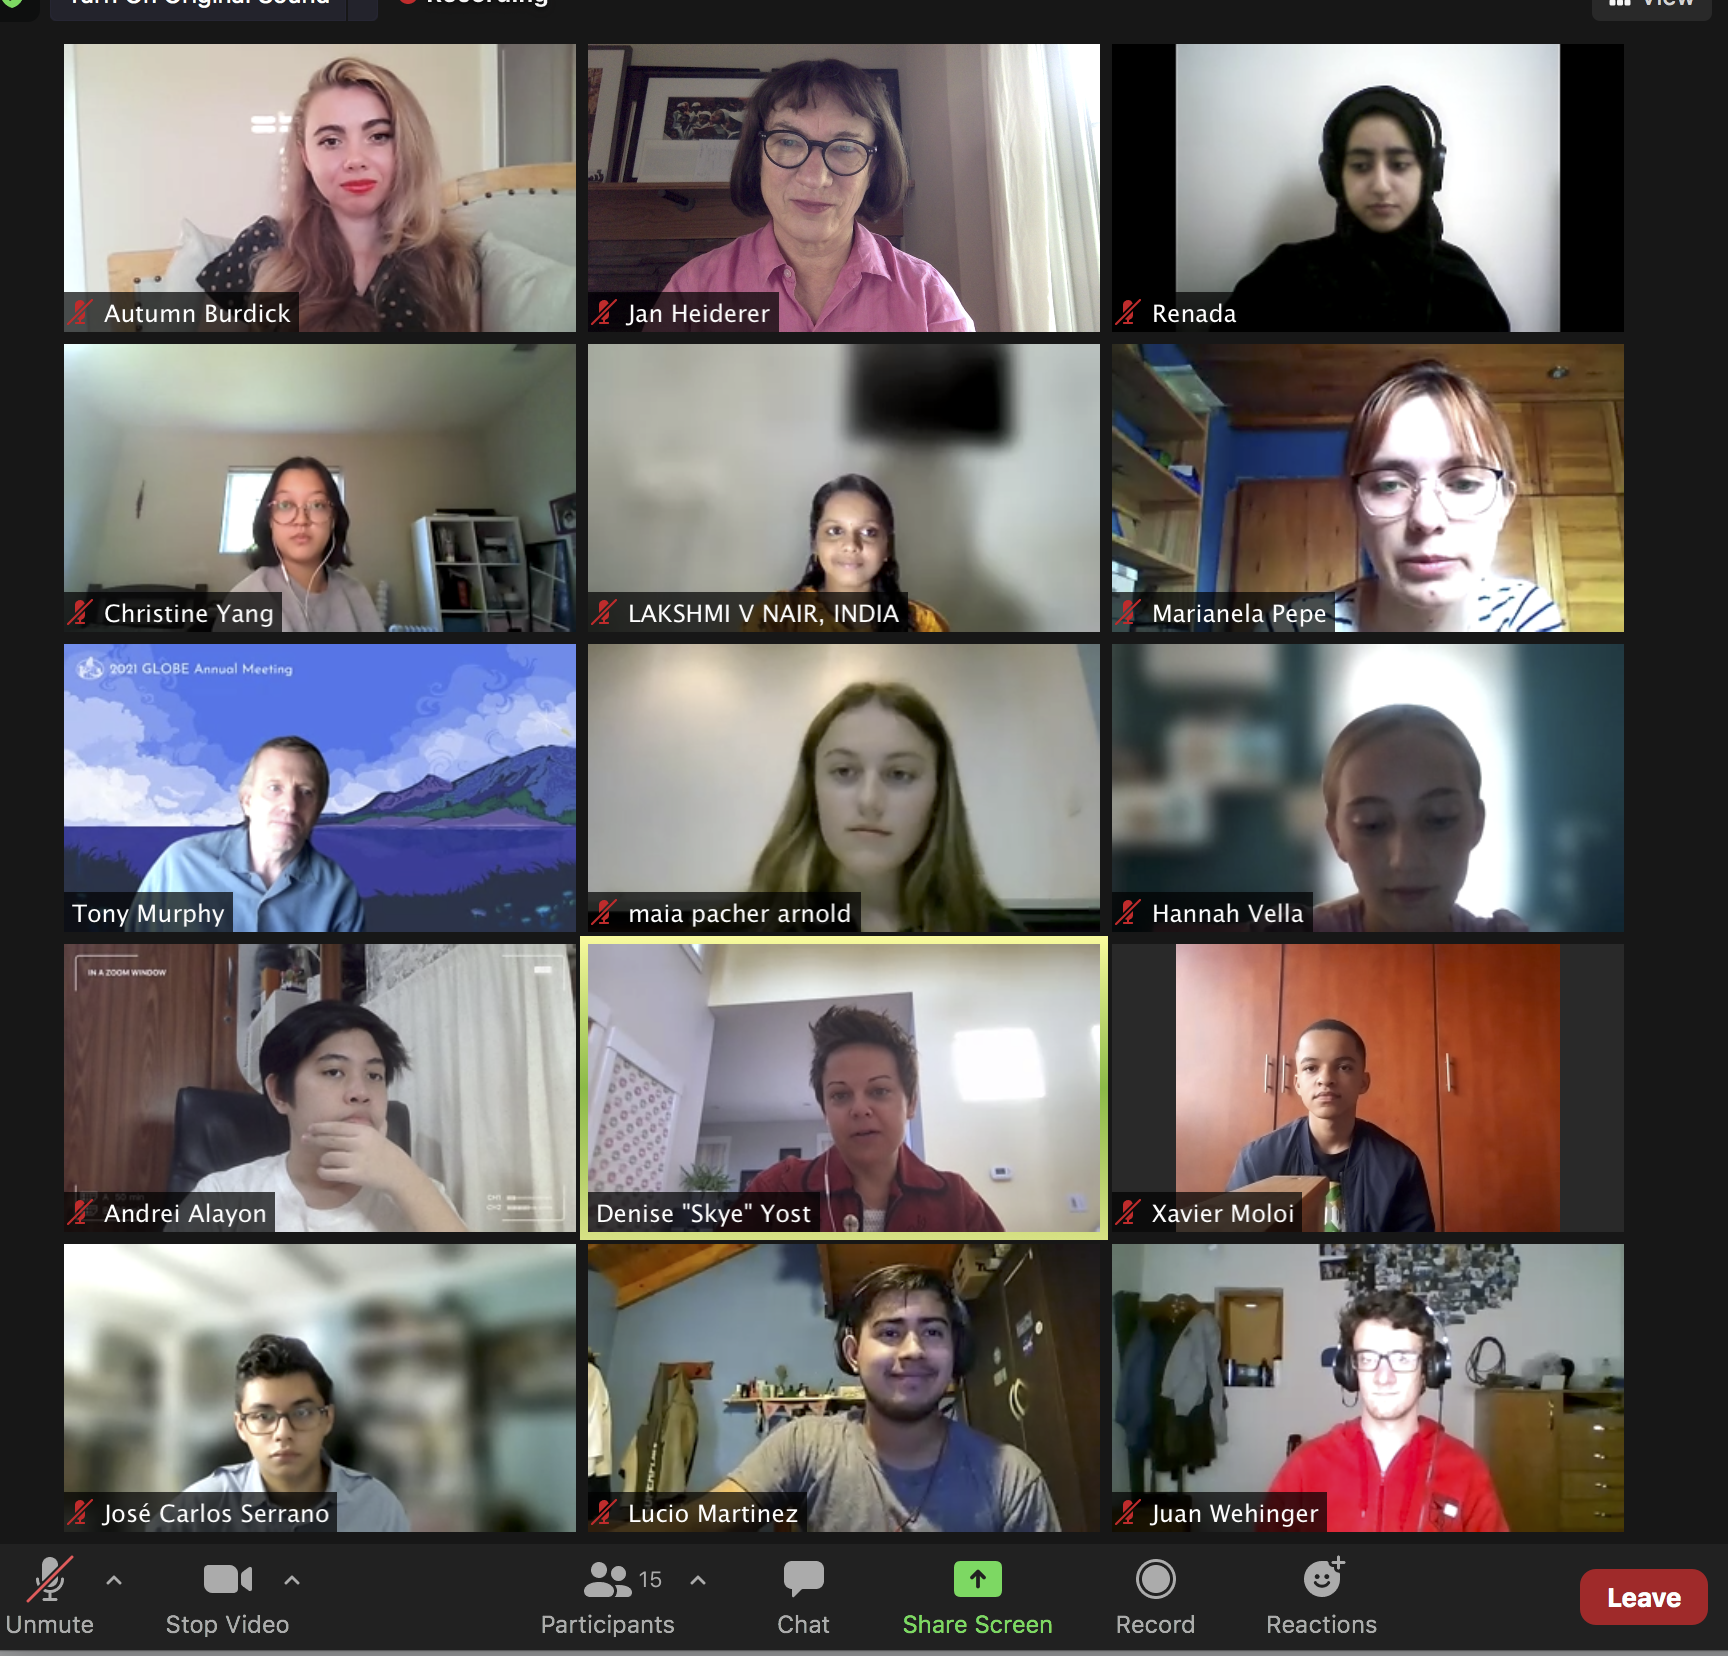 Photo of the GLOBE Student Vloggers during a virtual meeting